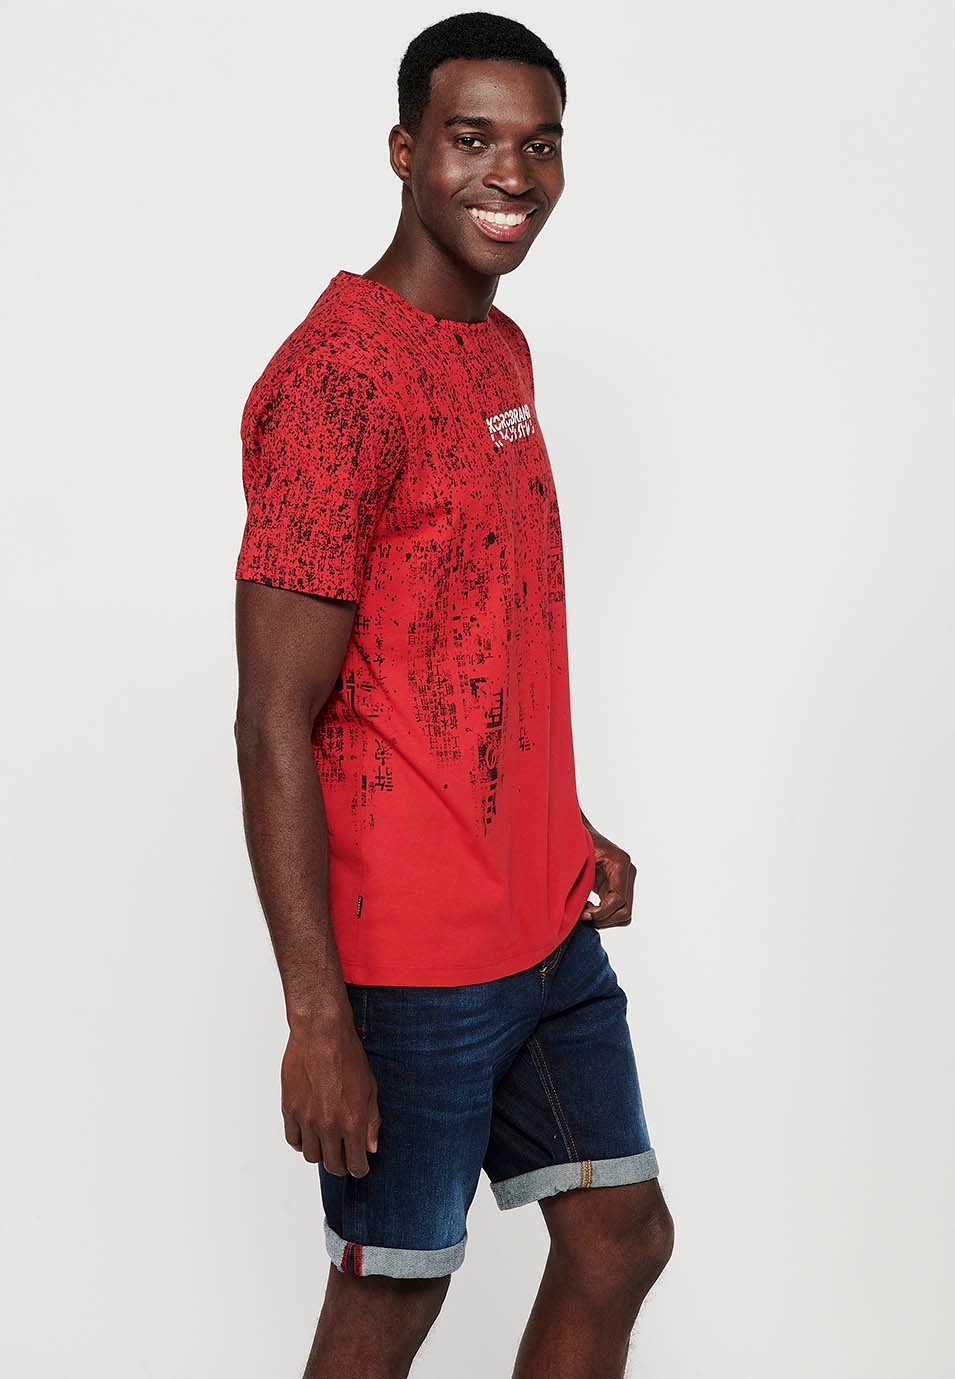 Short sleeve cotton t-shirt, red color for men